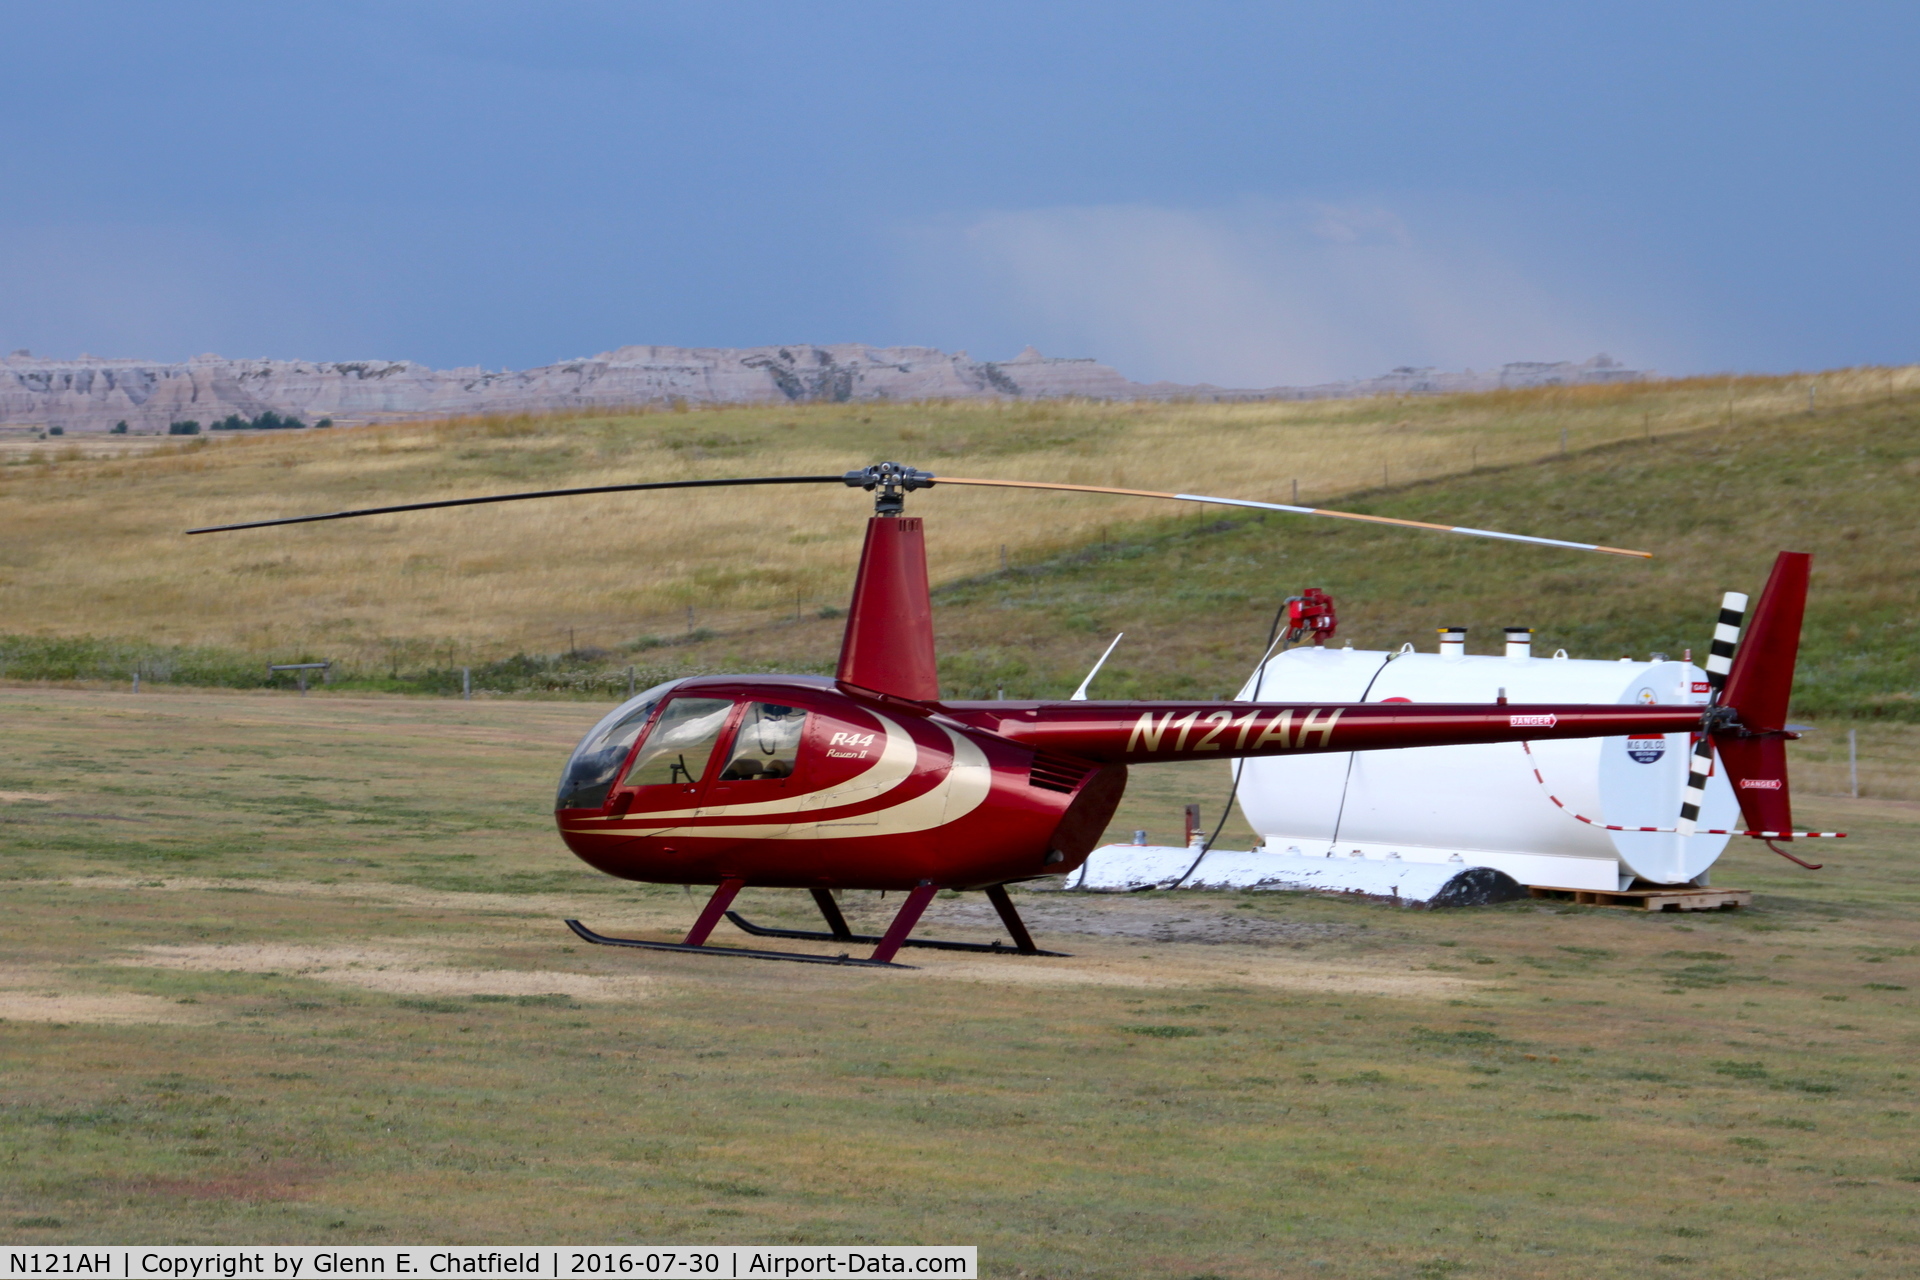 N121AH, 2004 Robinson R44 II C/N 10548, At the Badlands in South Dakota for giving rides